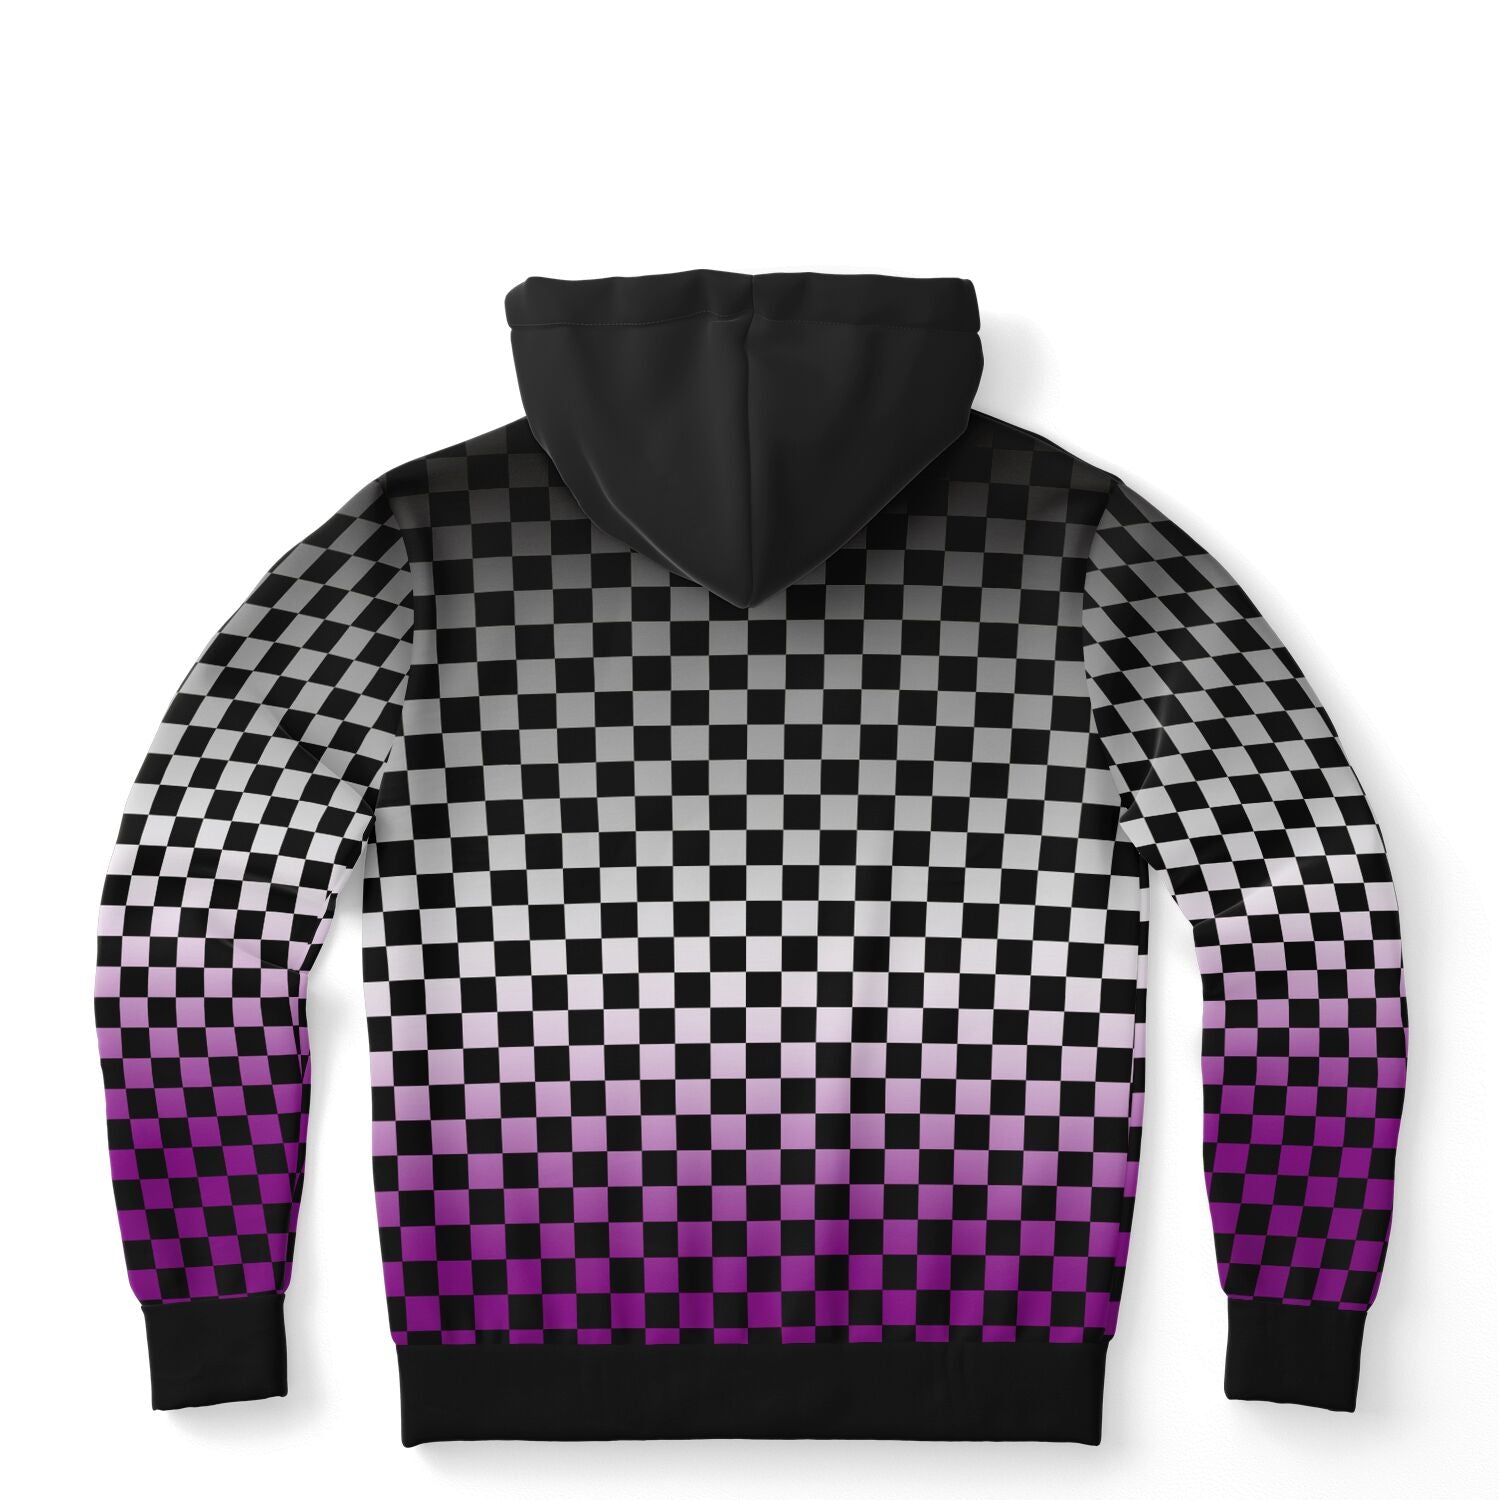 Asexual Pride Black Contrast Checkered Pullover Hoodie Fashion Hoodie - AOP PRIDE MODE